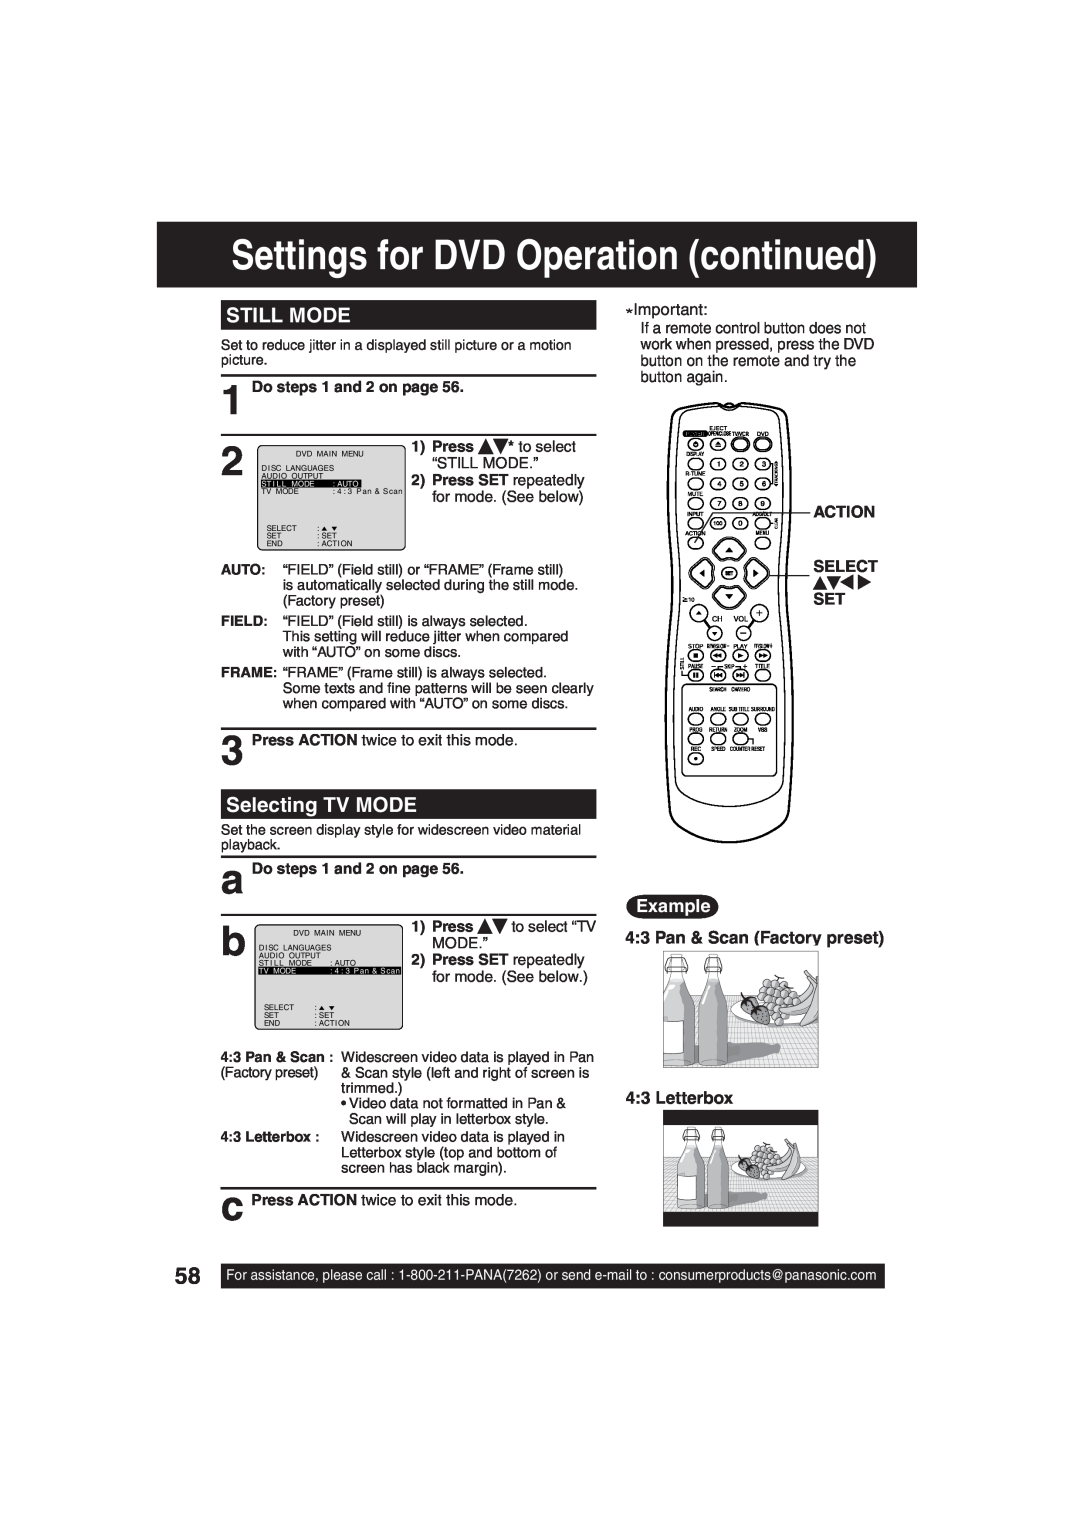 Panasonic PV-DF203 Settings for DVD Operation continued, Still Mode, Selecting TV MODE, Example, Action Select Set, Press 